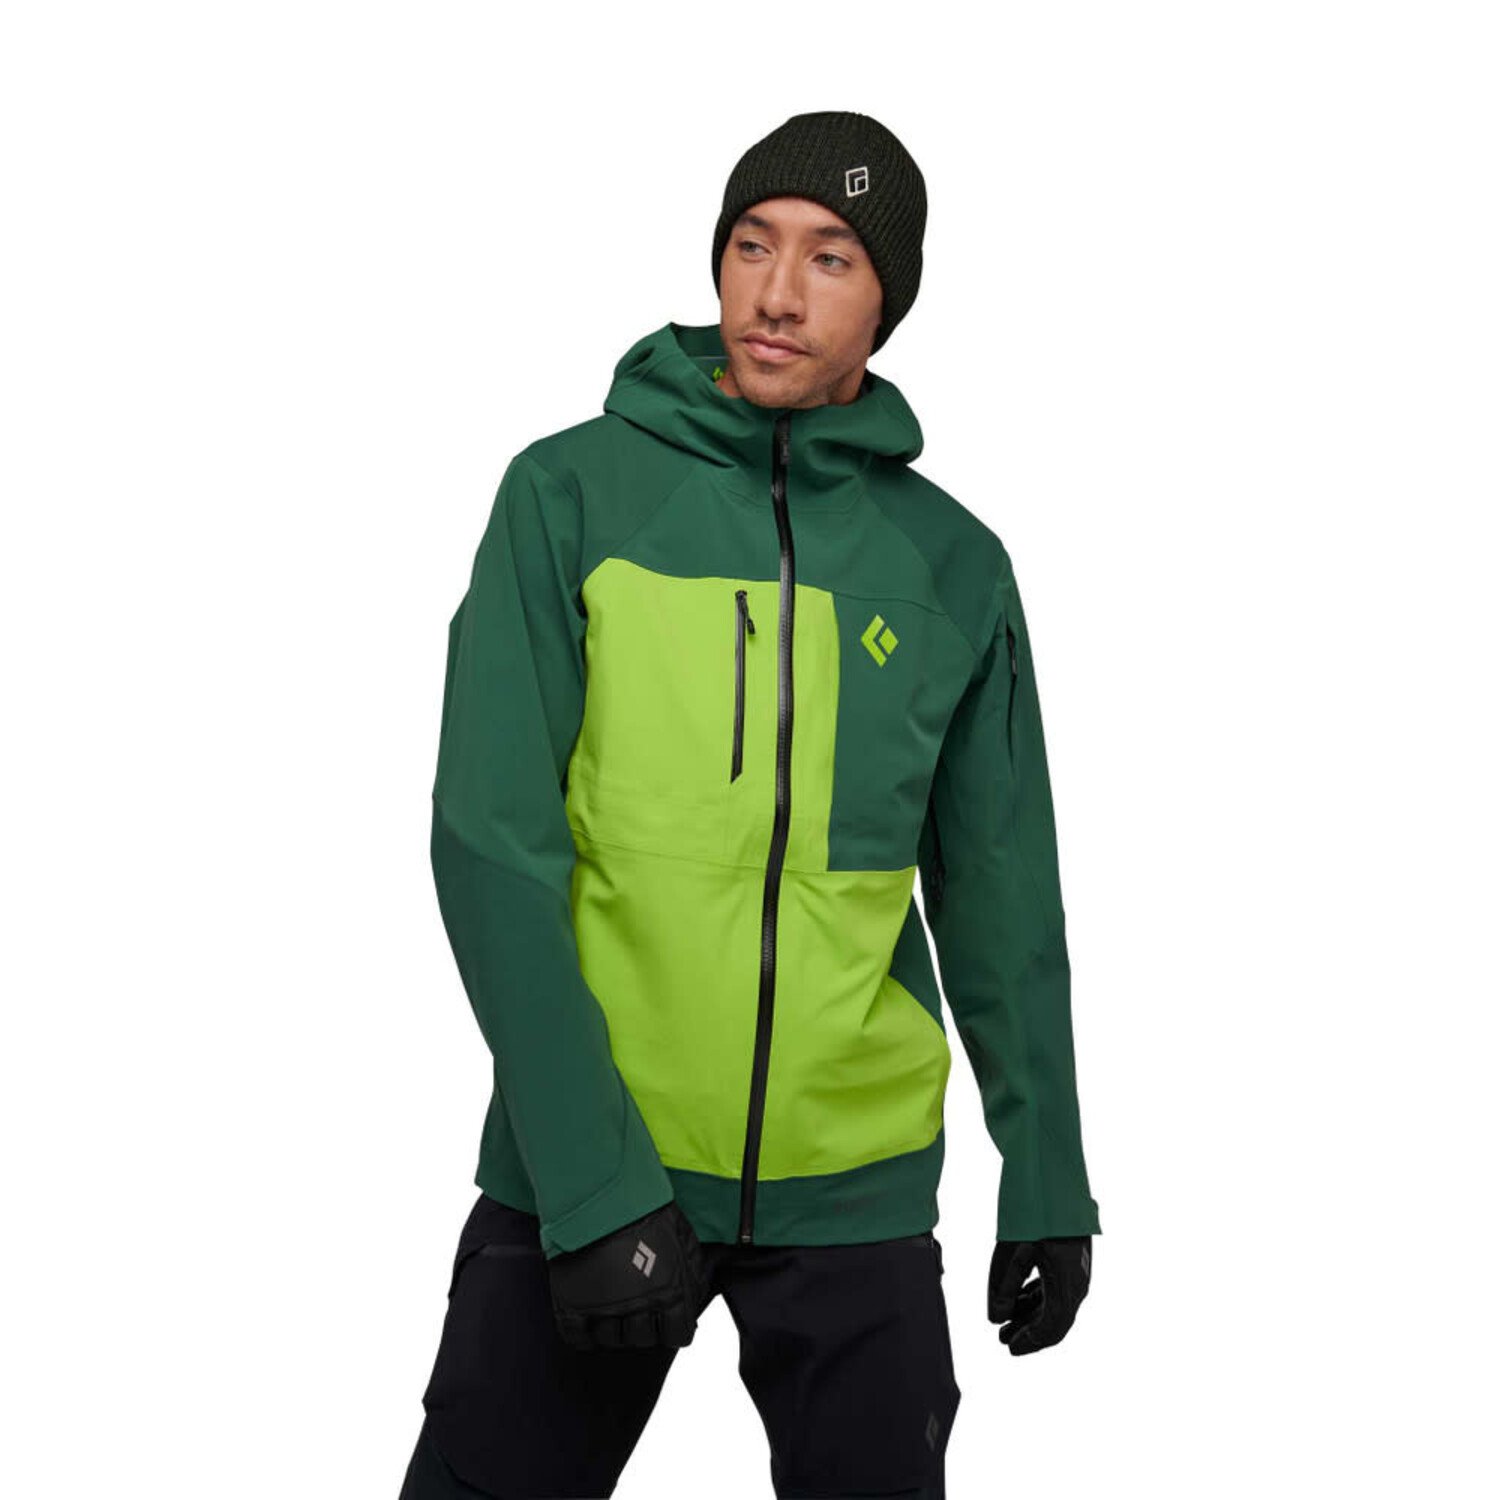 BLACK DIAMOND MEN'S RECON STRETCH PRO SHELL | FOREST/LIME